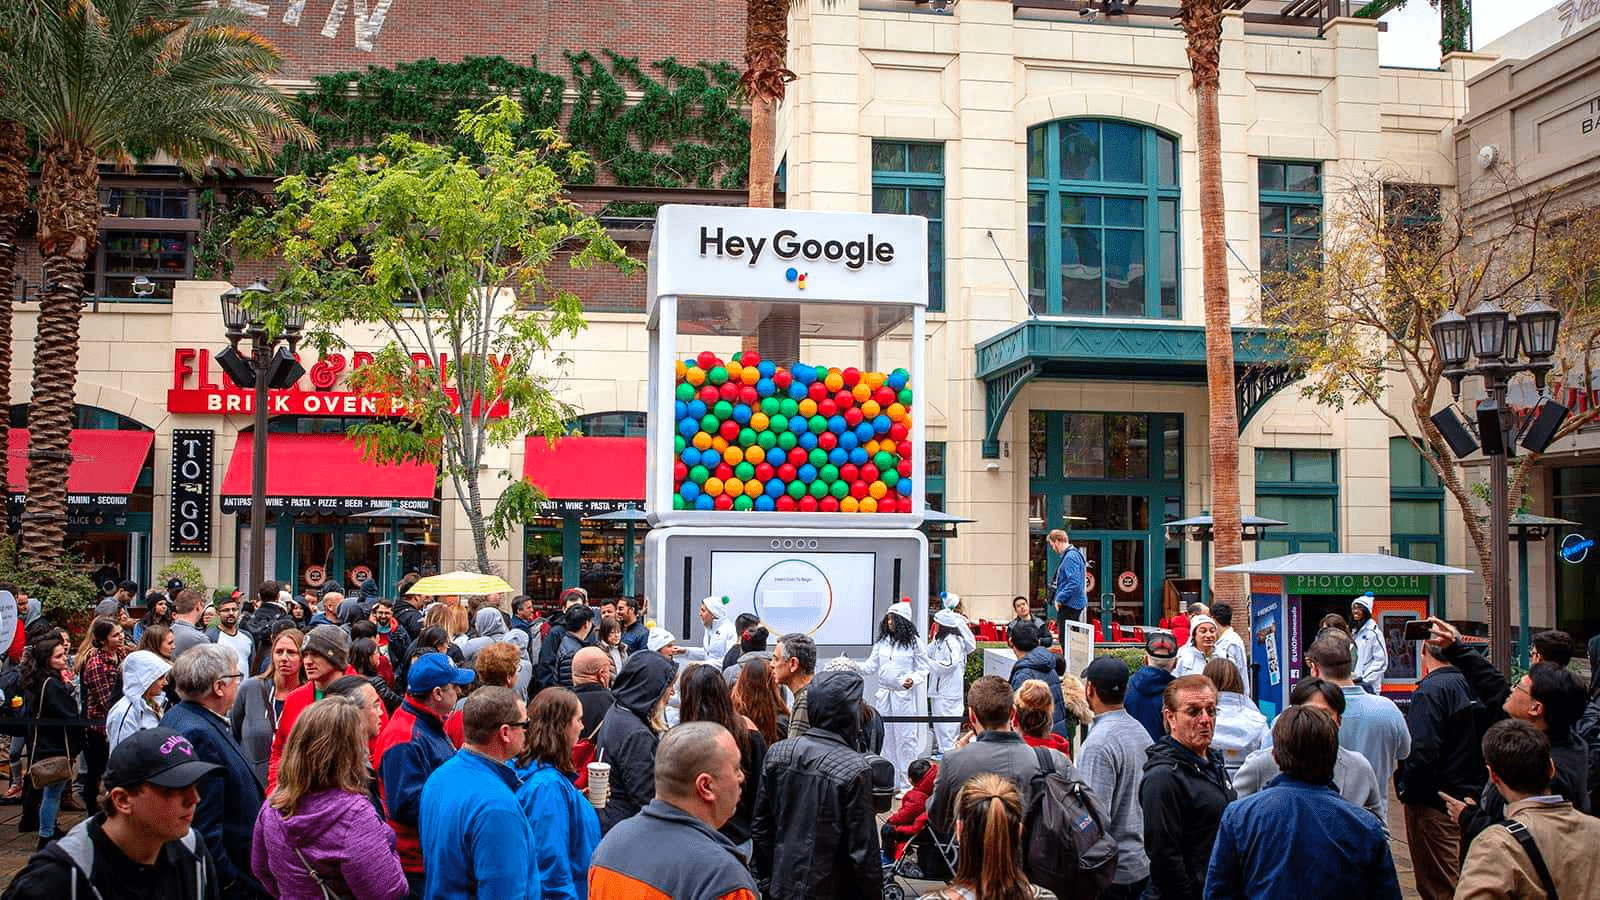 hey google sponsores event with giant gumball machine